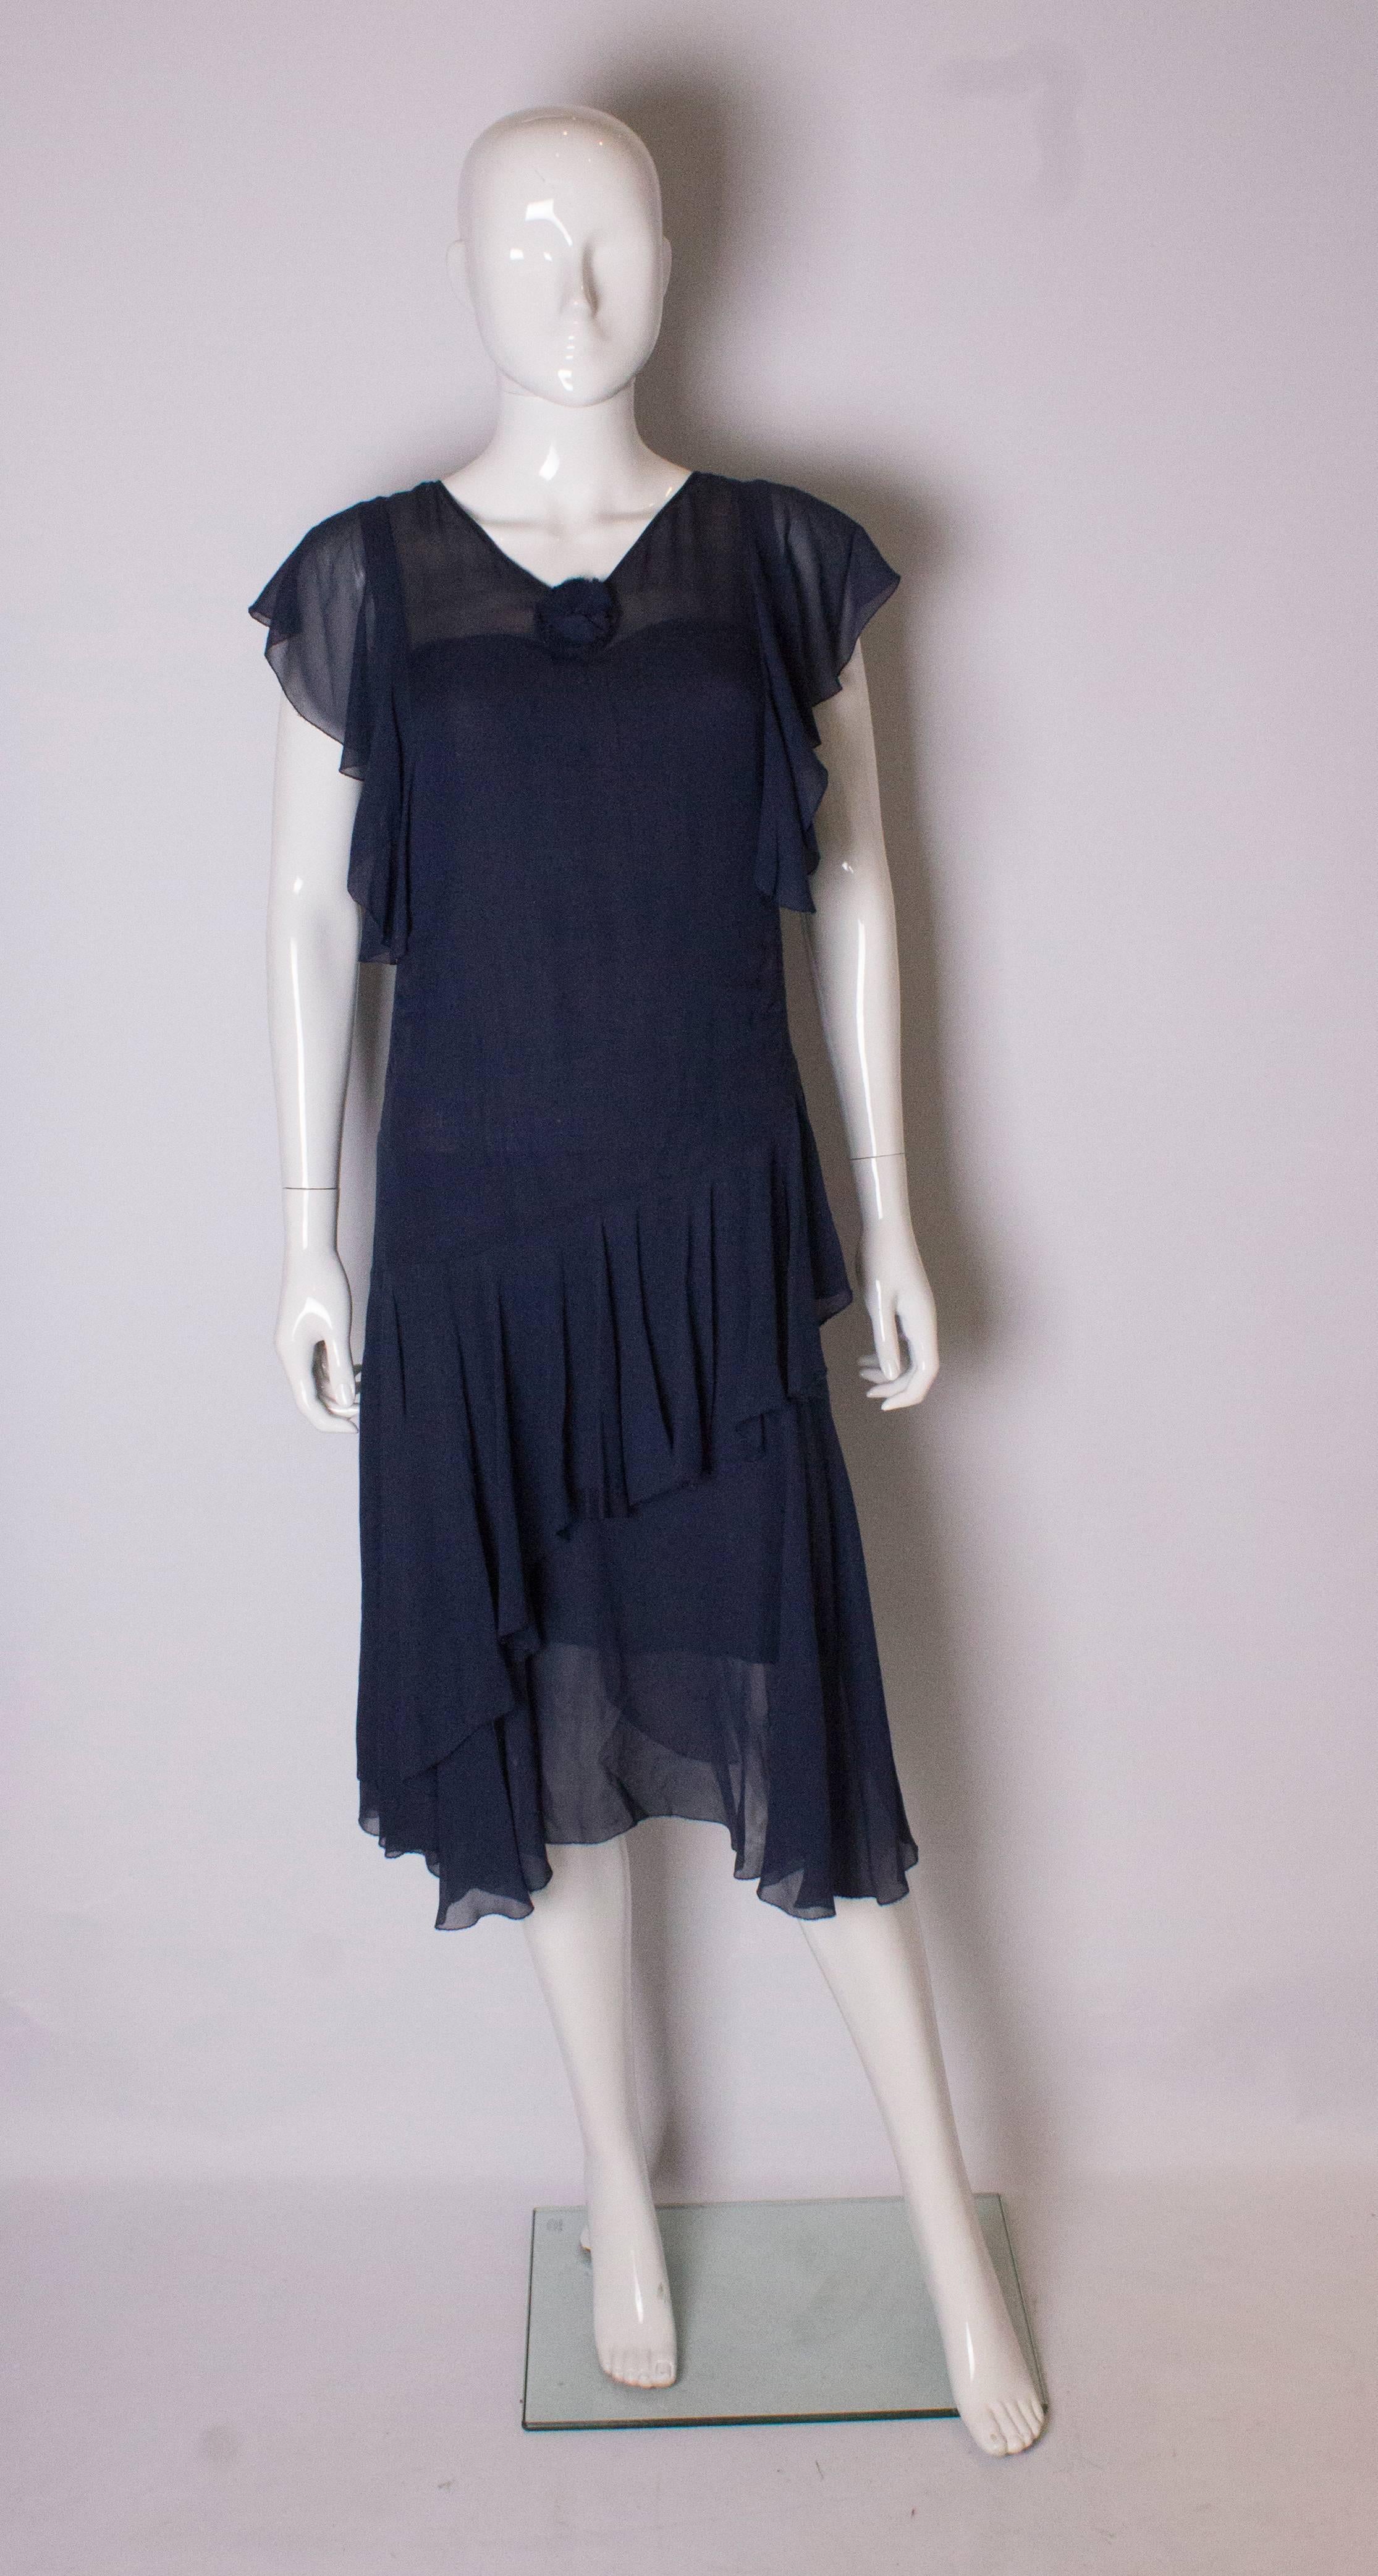 A pretty french navy dress from the 1930s. In a chiffon like fabric, the dress has a v neckline, cap sleeves , diagonal frills at the front, and frills at the back. It is fully lined.